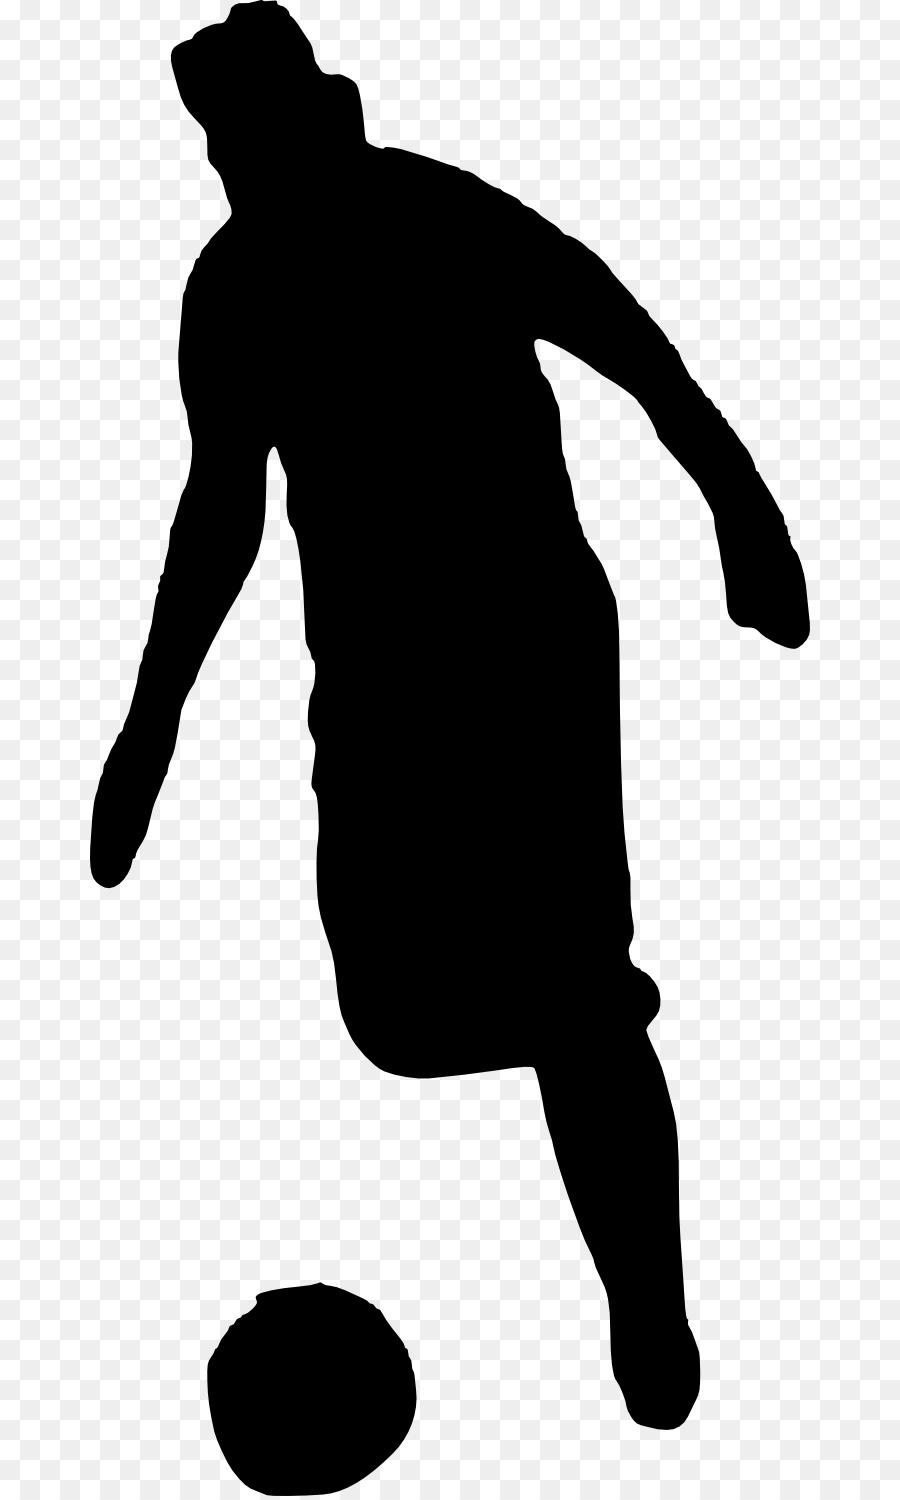 Silhouette Football player Clip art - Silhouette png download - 720*1496 - Free Transparent Silhouette png Download.